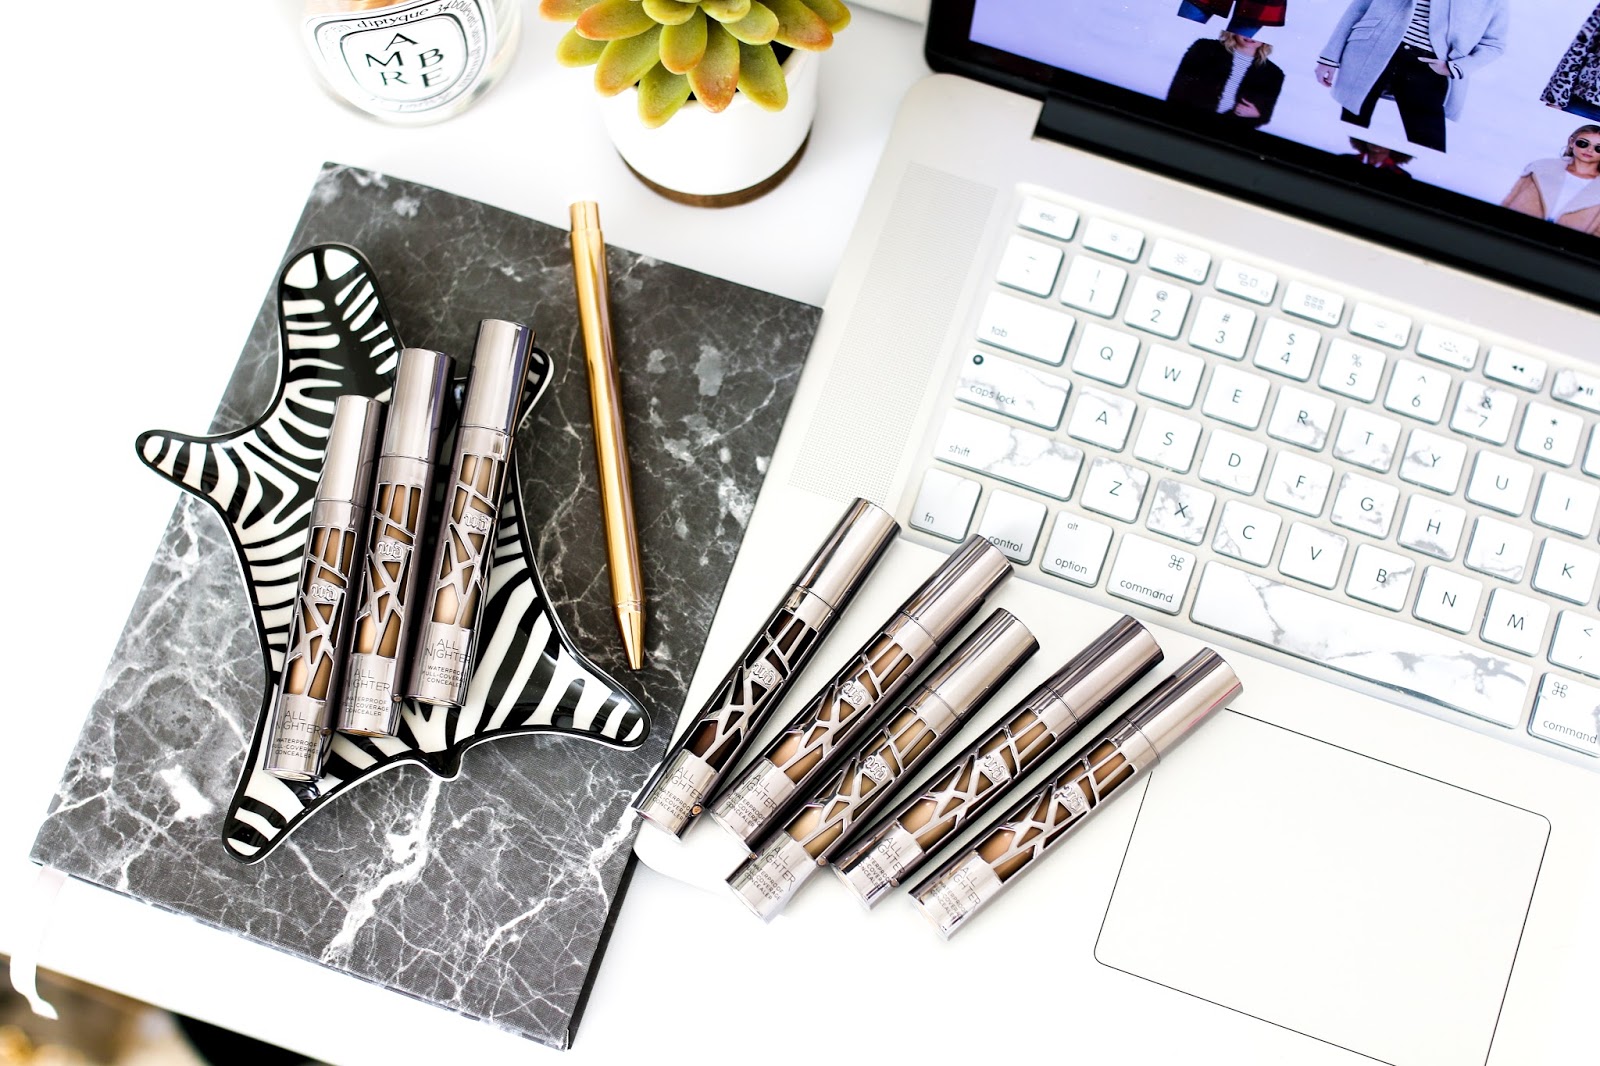 Review: Urban Decay All Nighter Waterproof Concealer with Swatches of Every Shade